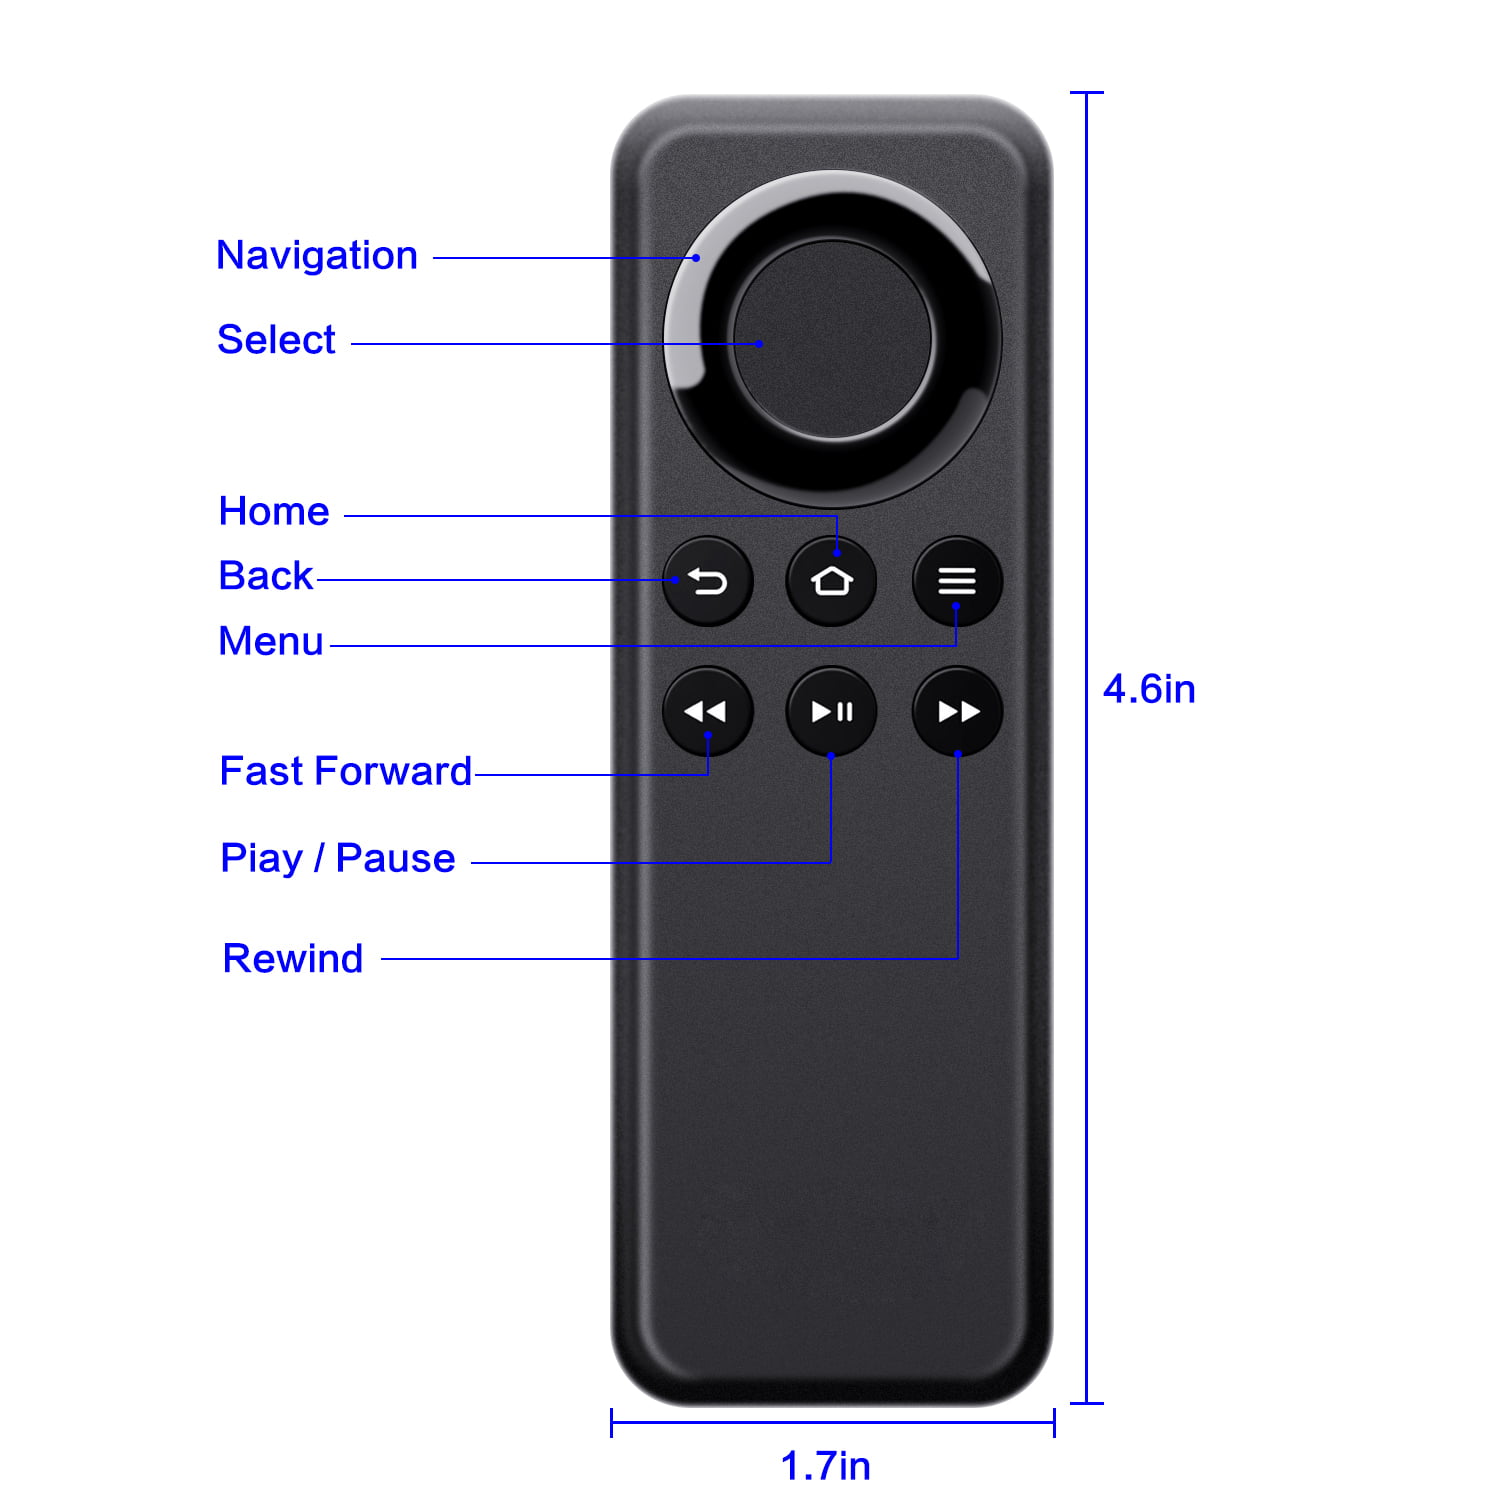 New CV25LM Remote Control replacement for Amazon Fire TV Stick